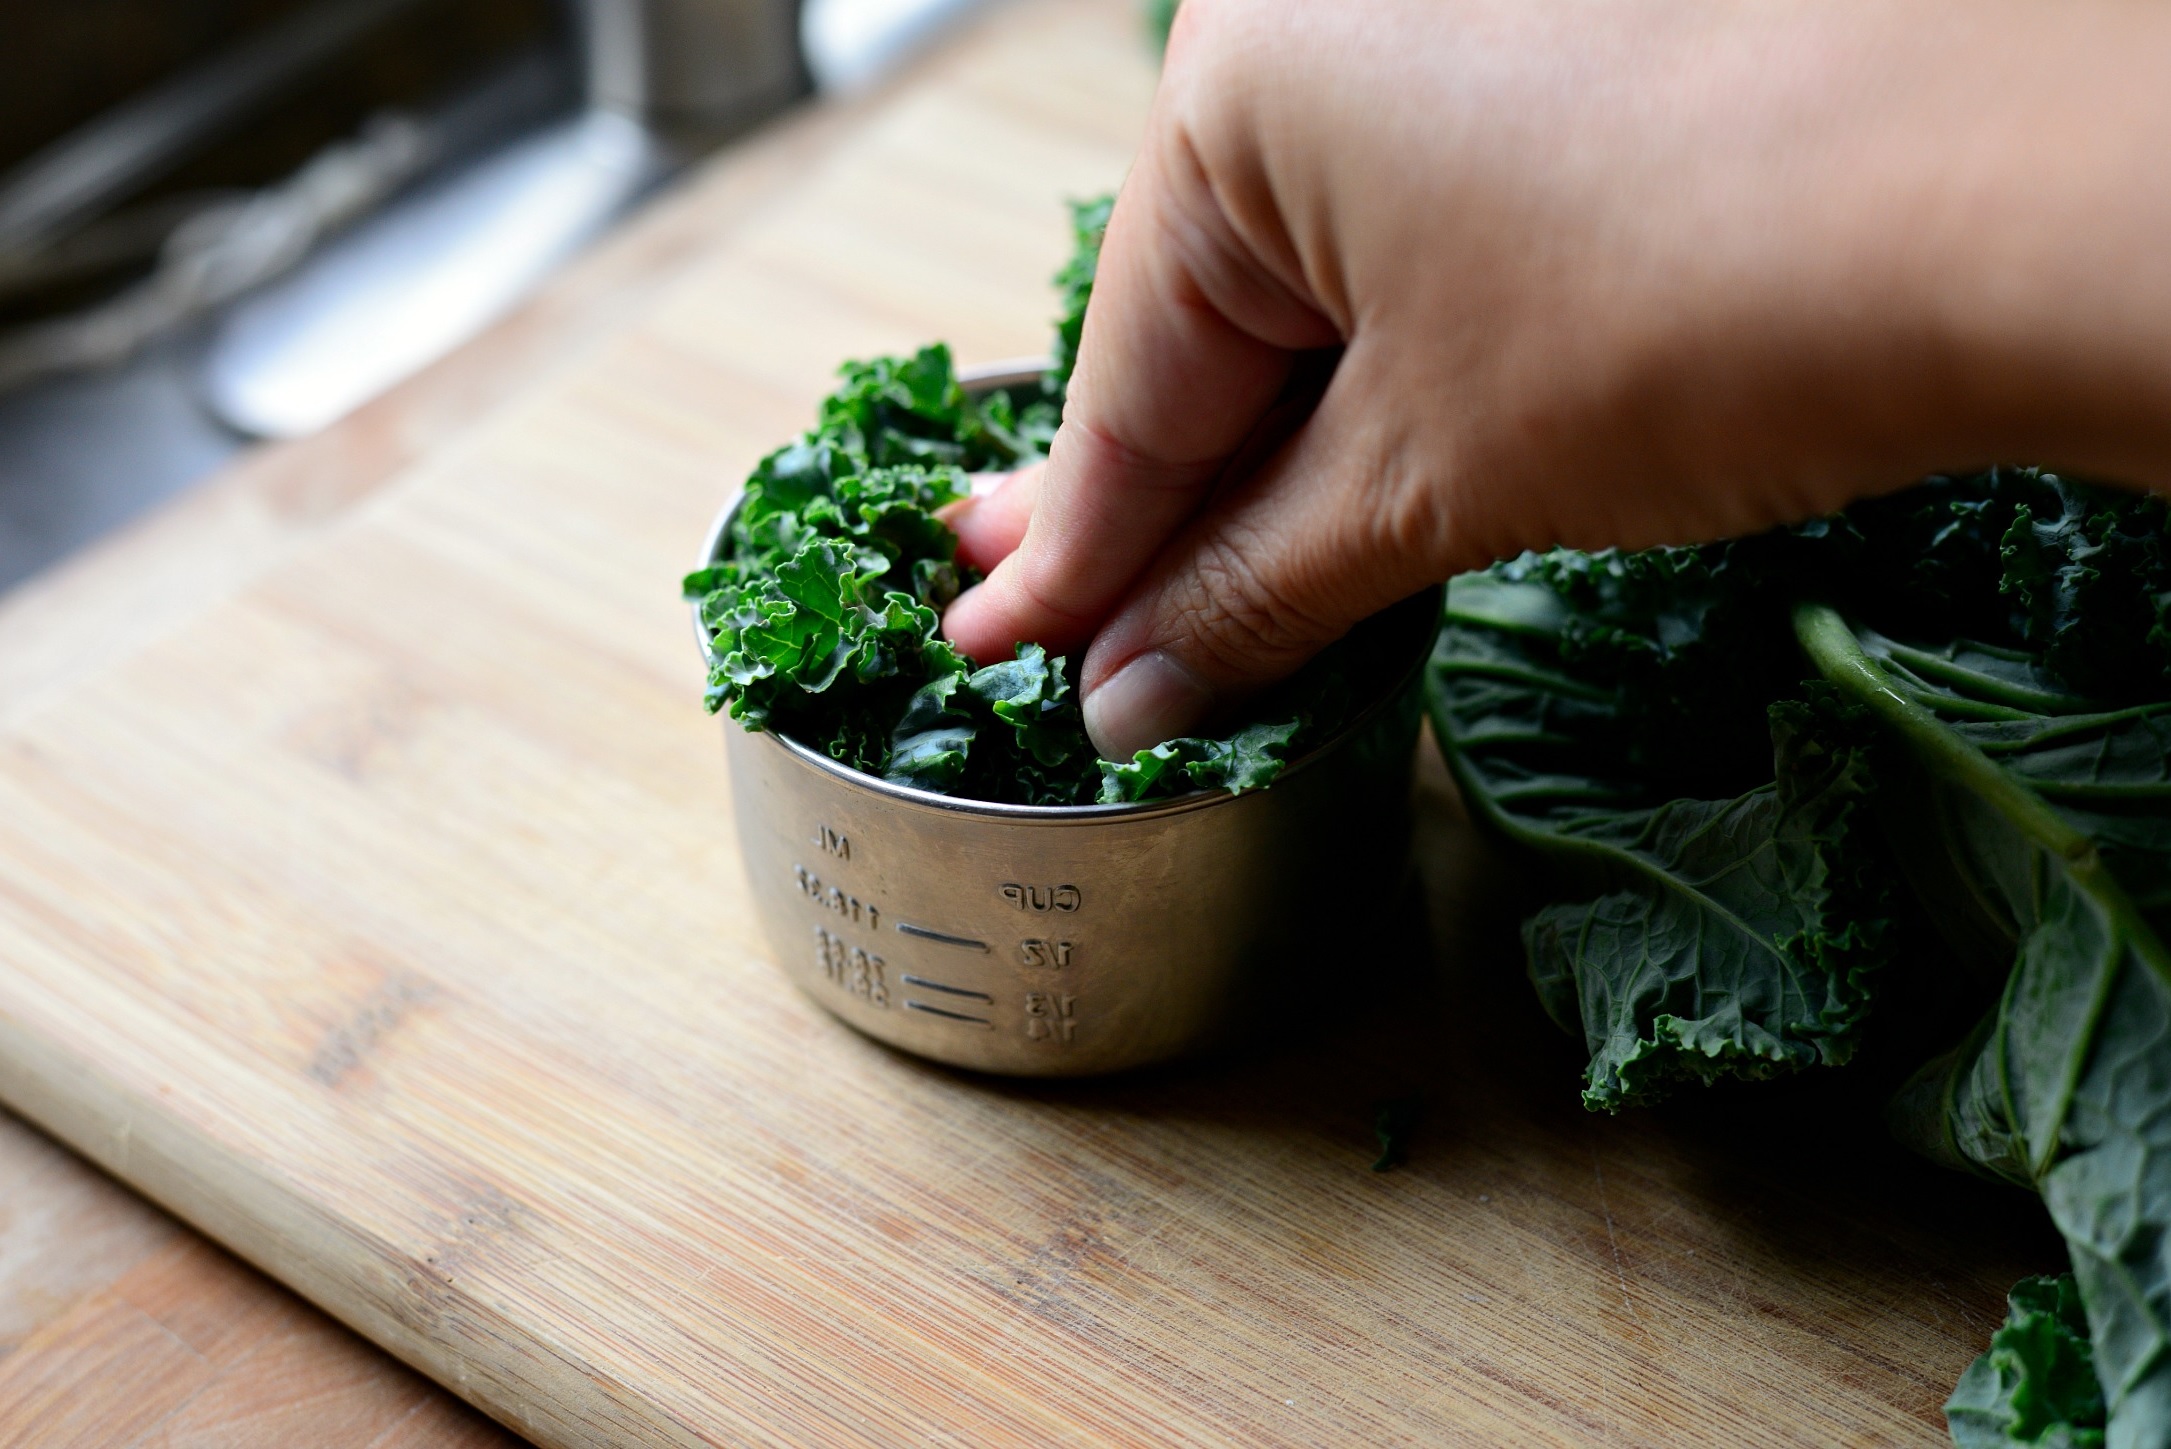 28-great-kale-nutrition-facts-1-cup